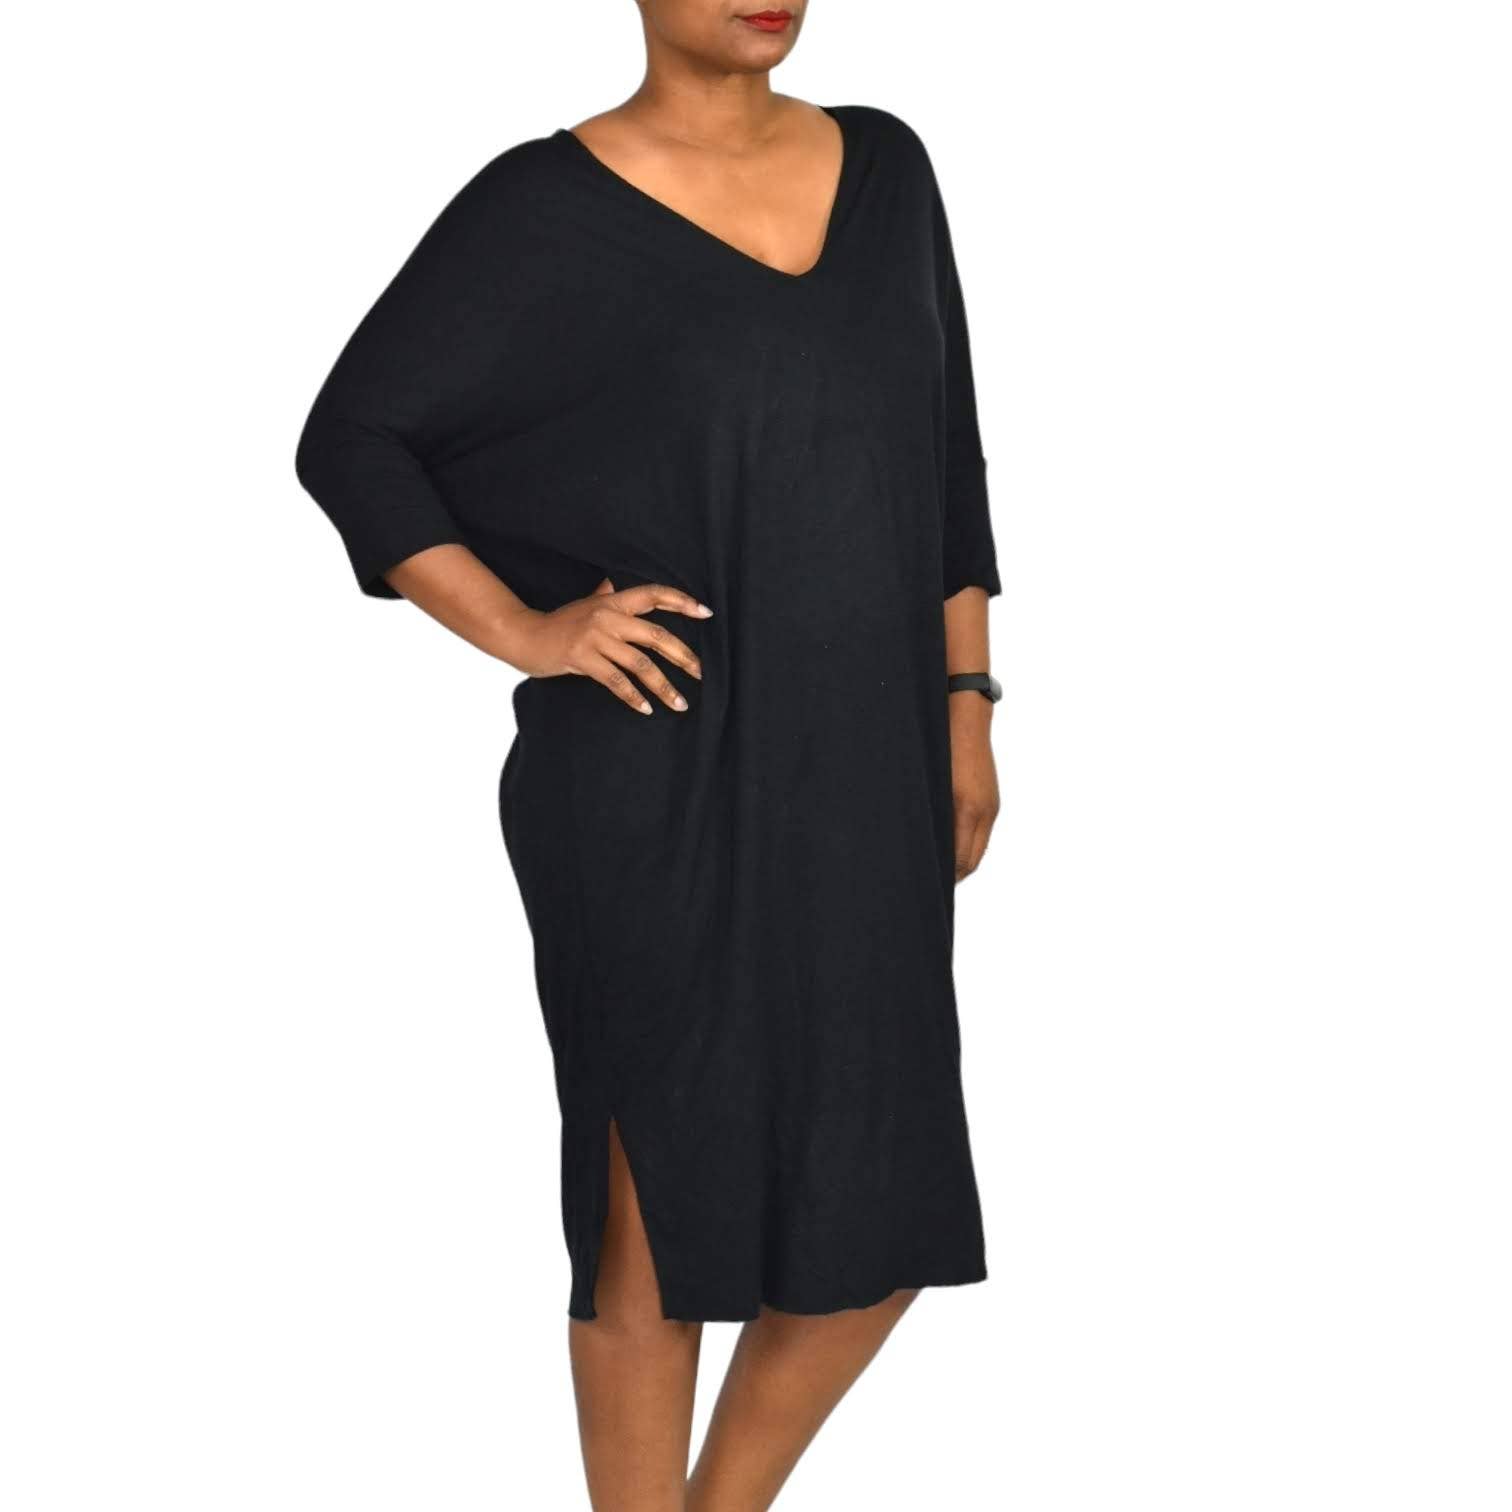 Natalie Busby Dress Black Bamboo Jersey Midi Day Easy Casual T Shirt Size Small